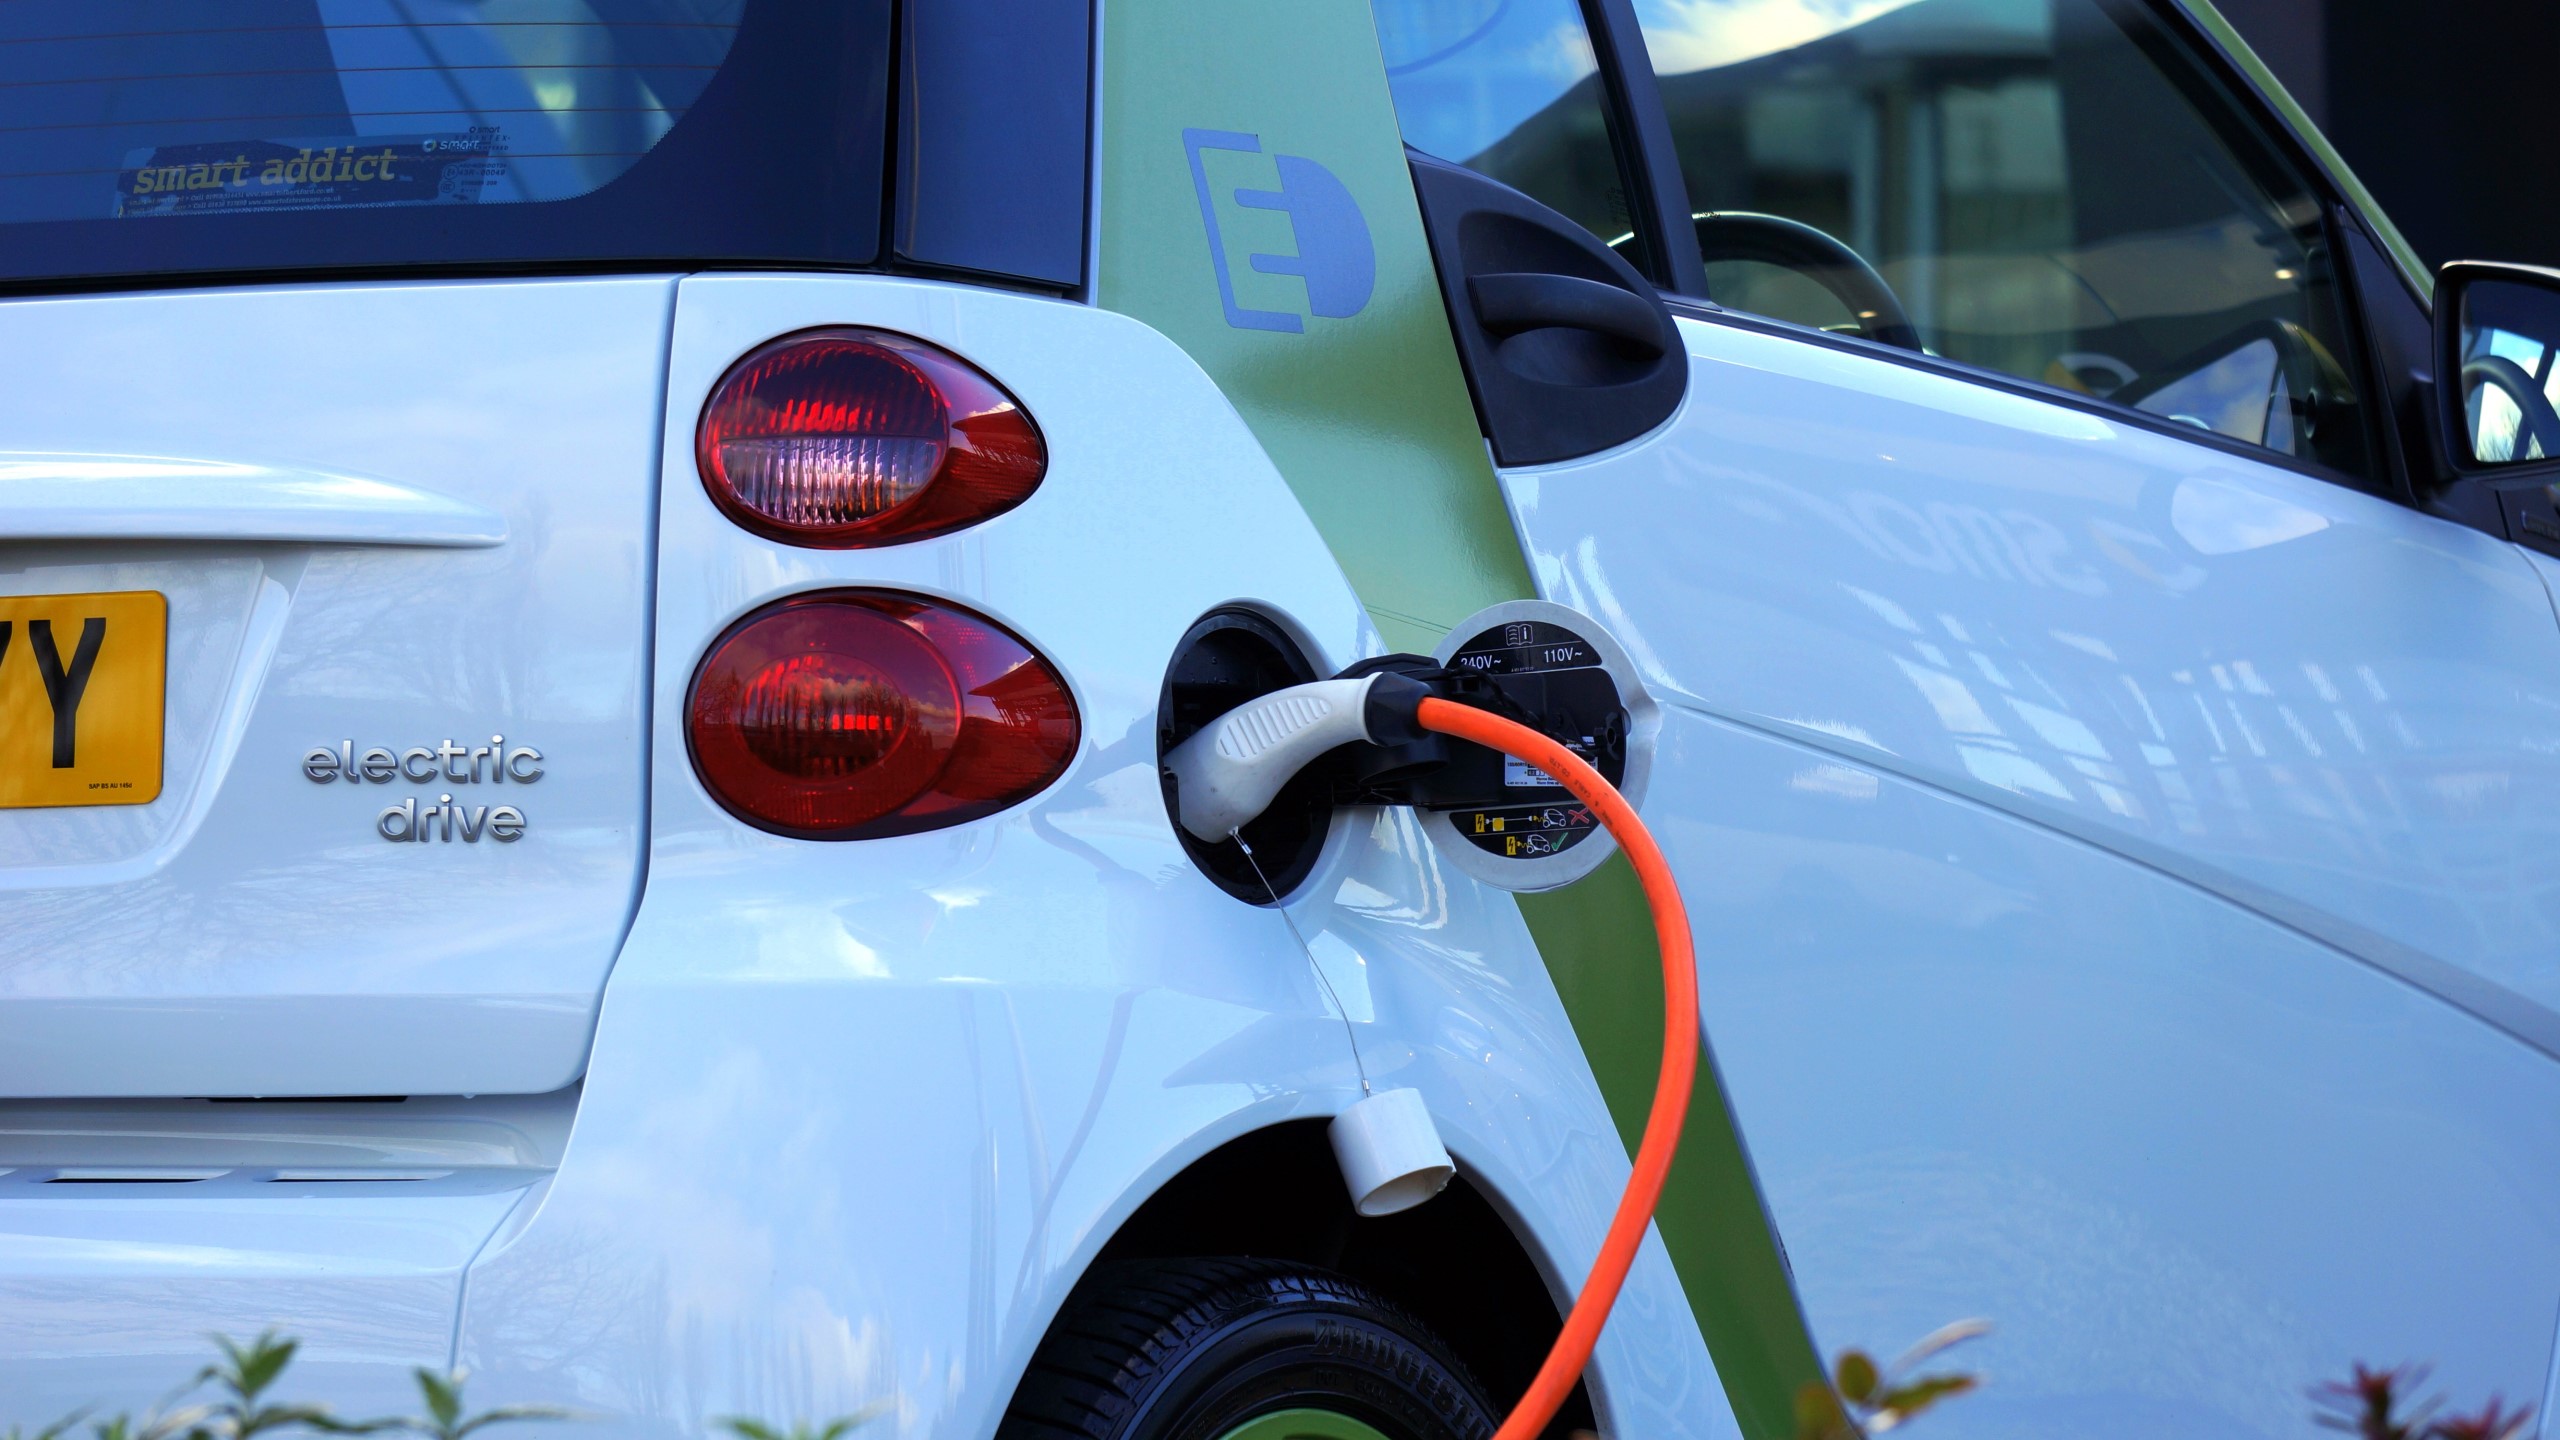 An electric car plugged in to charge